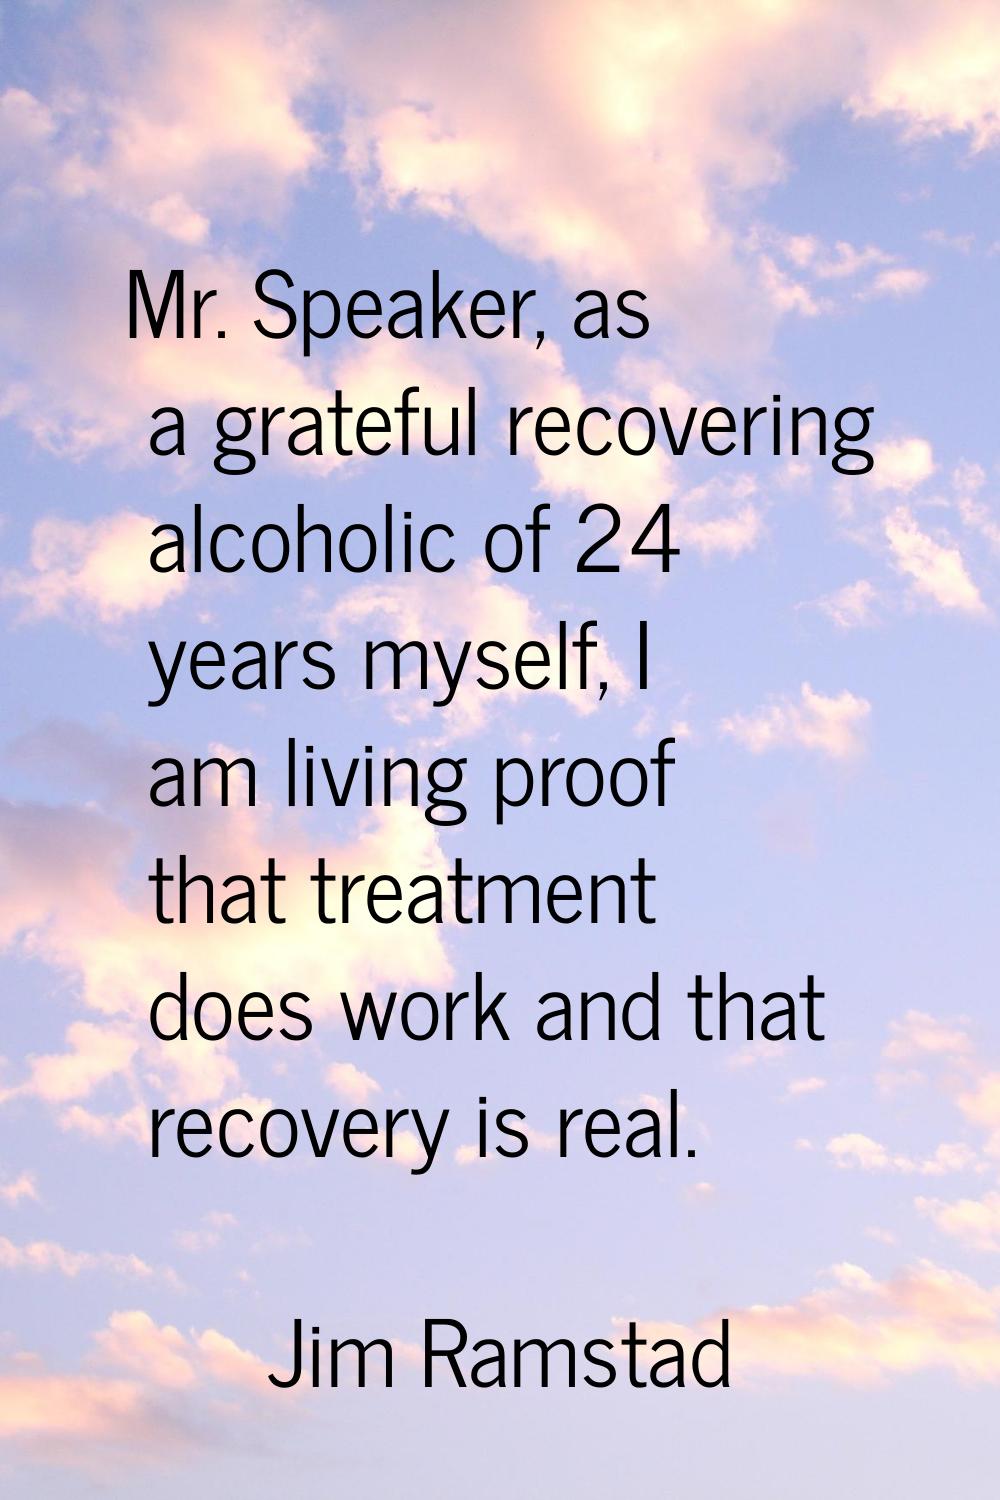 Mr. Speaker, as a grateful recovering alcoholic of 24 years myself, I am living proof that treatmen